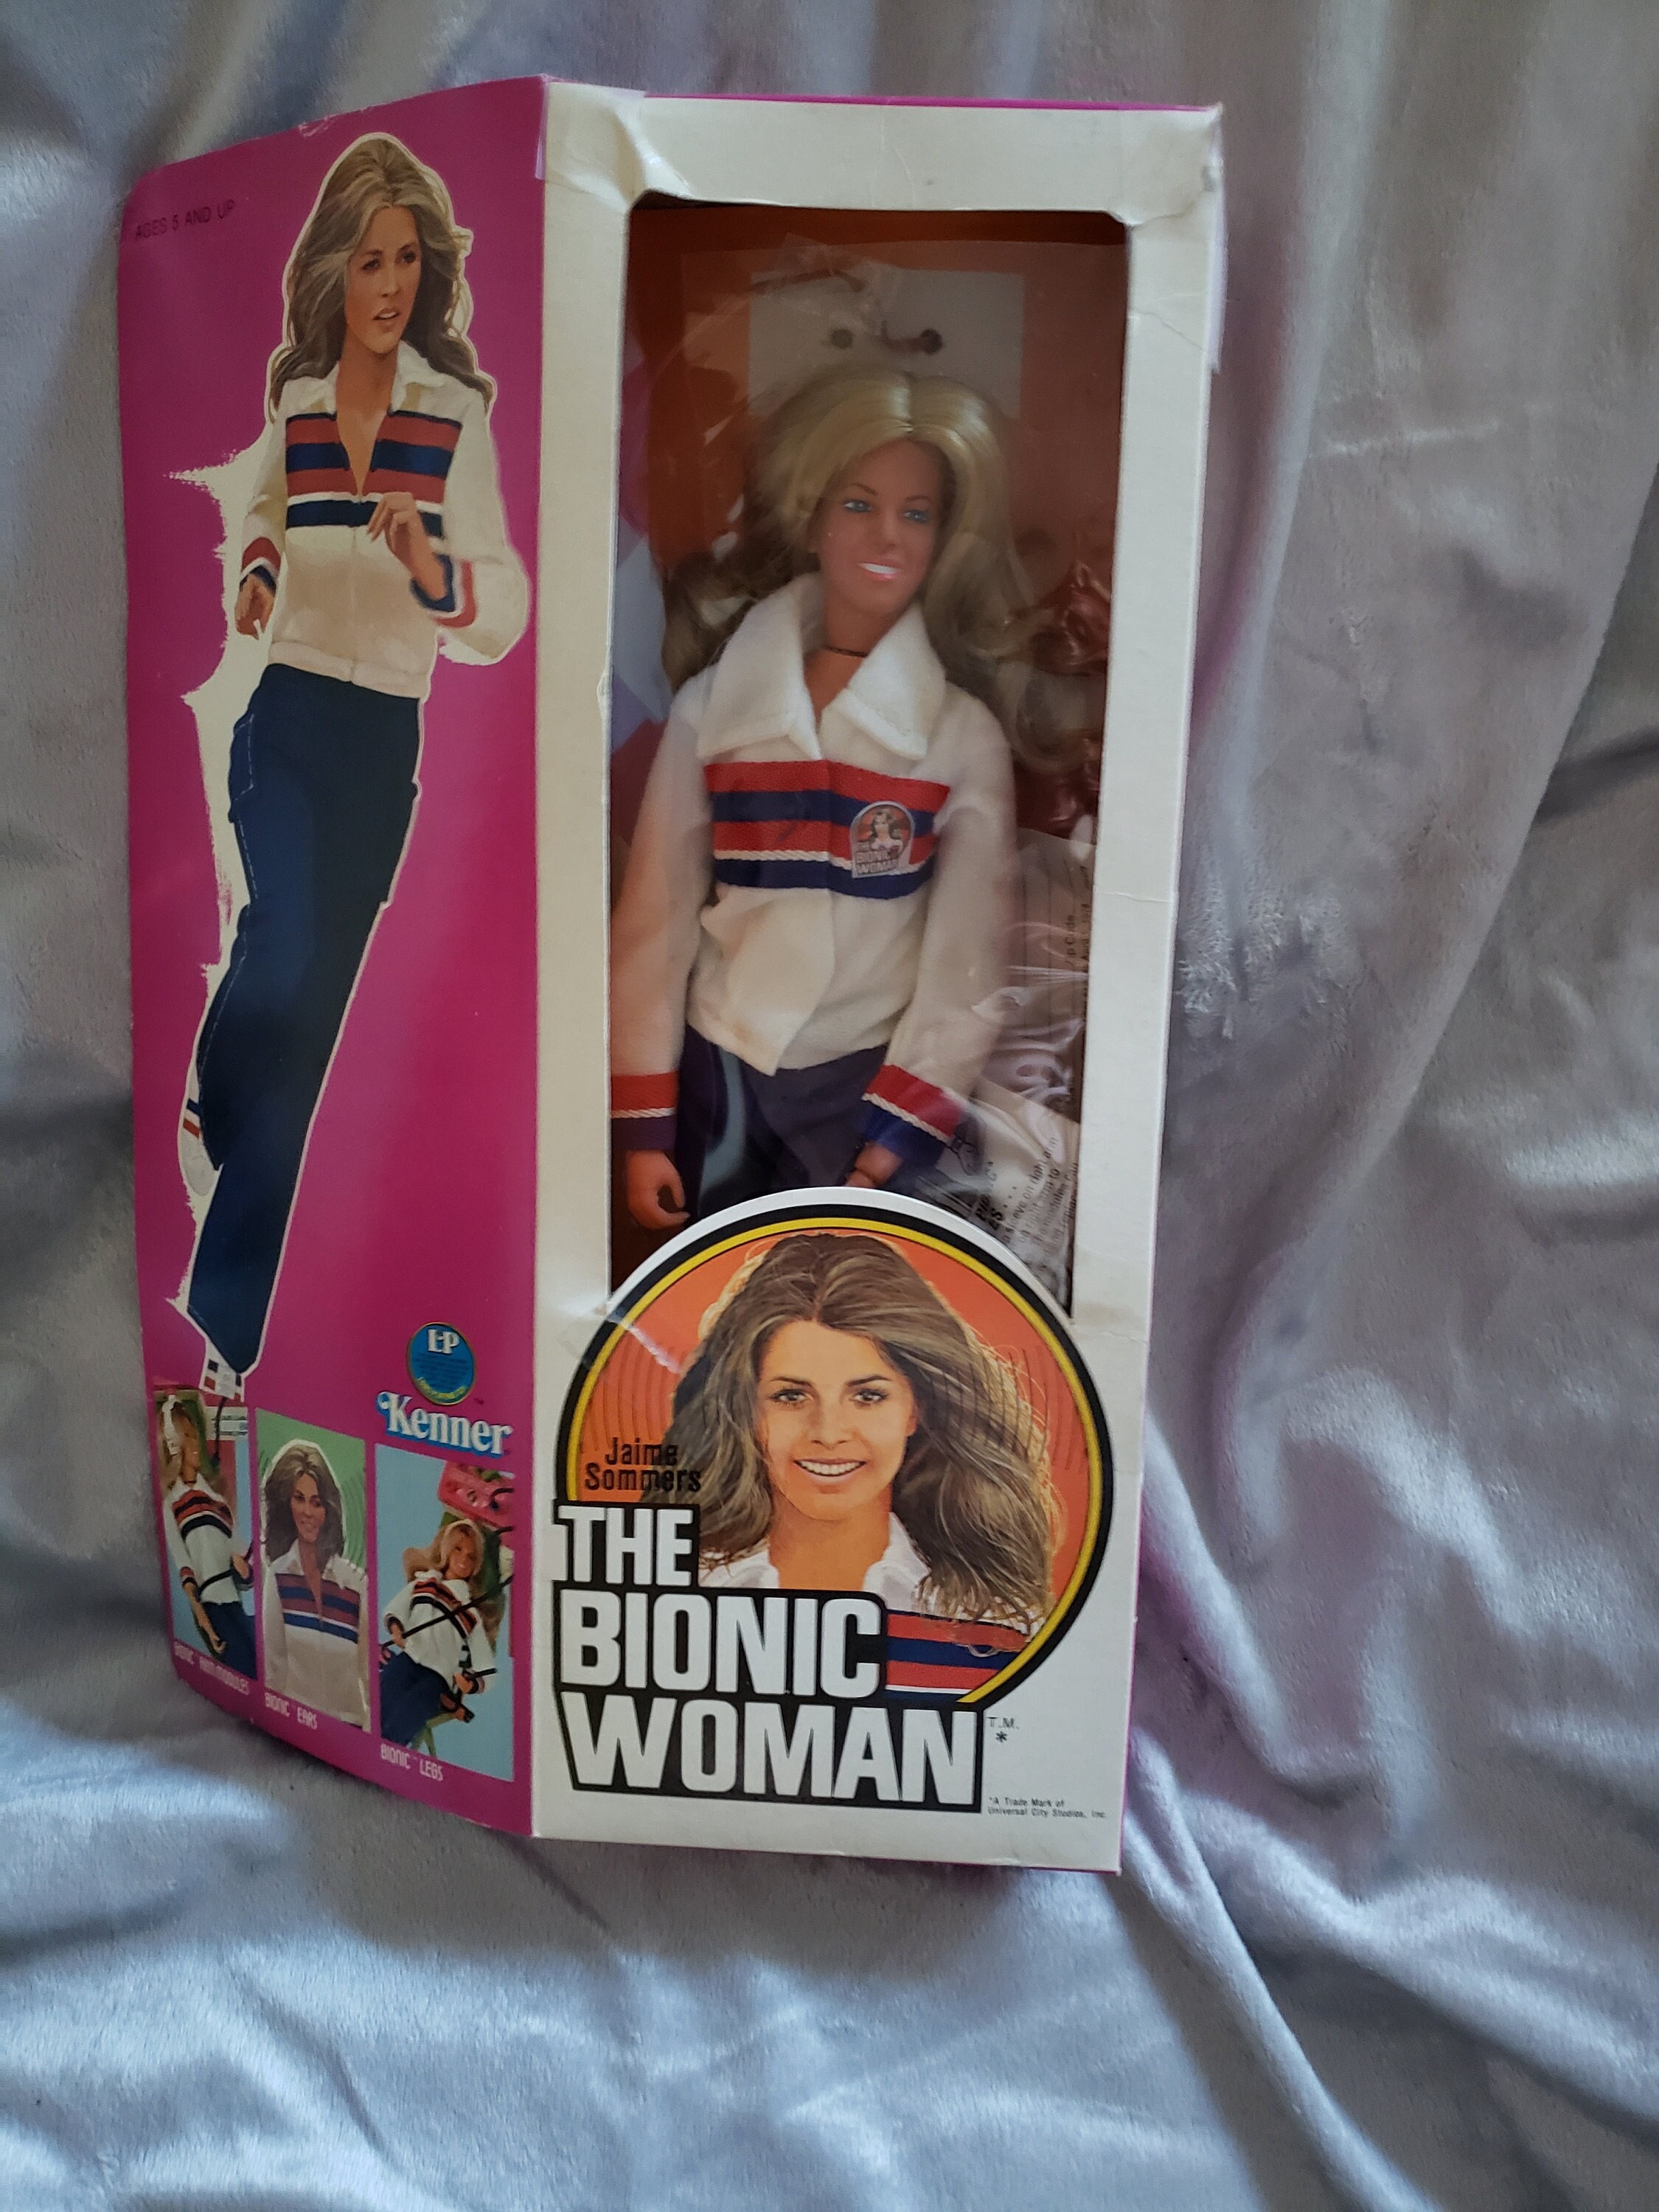 Found my Bionic Woman doll when cleaning out some stuff from my